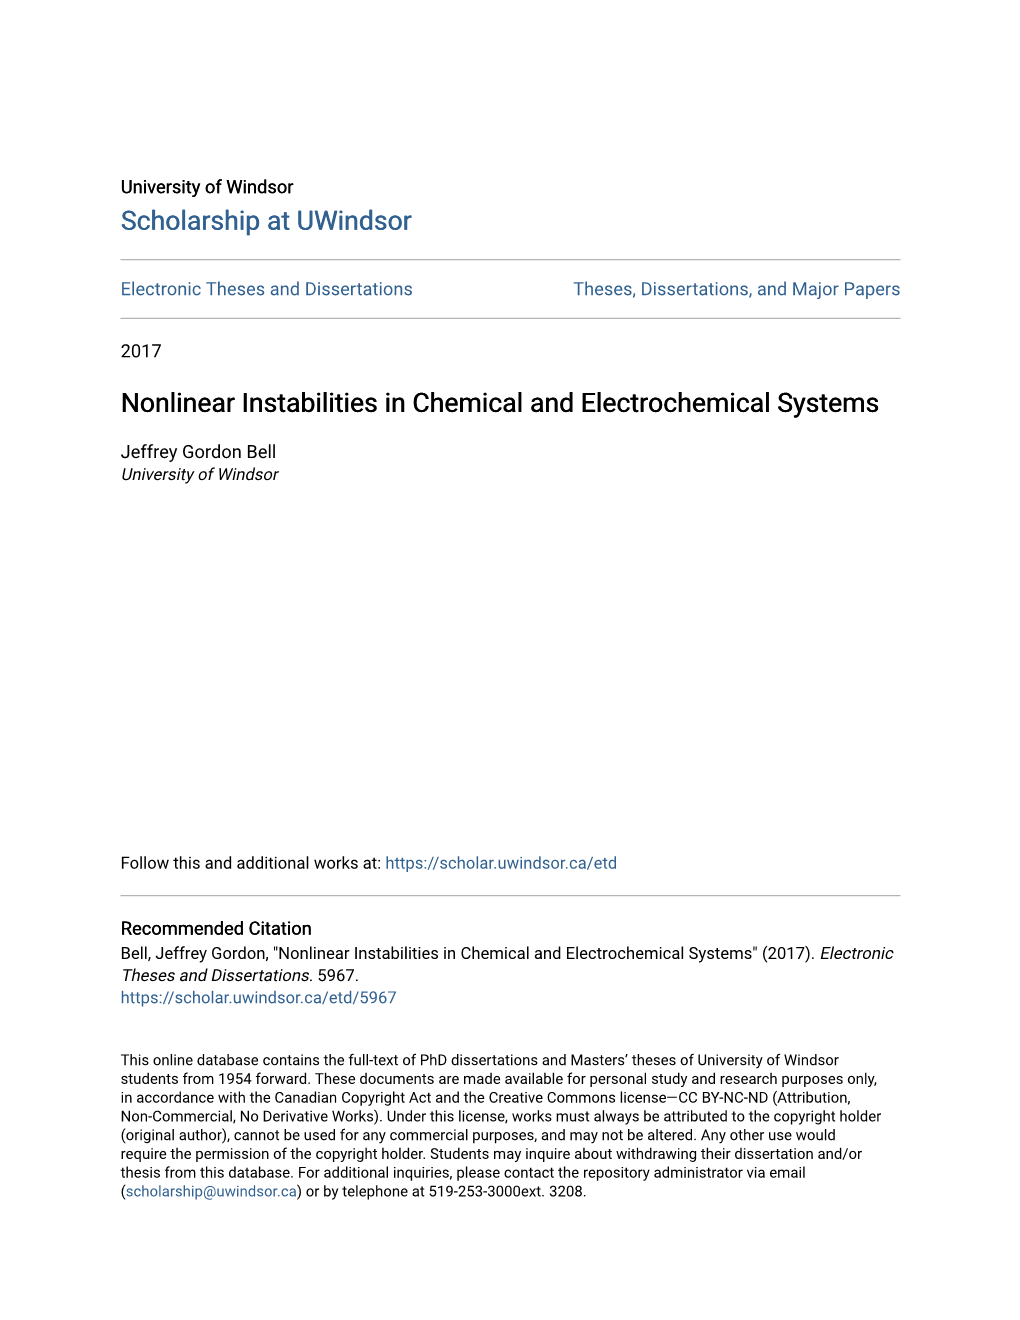 Nonlinear Instabilities in Chemical and Electrochemical Systems